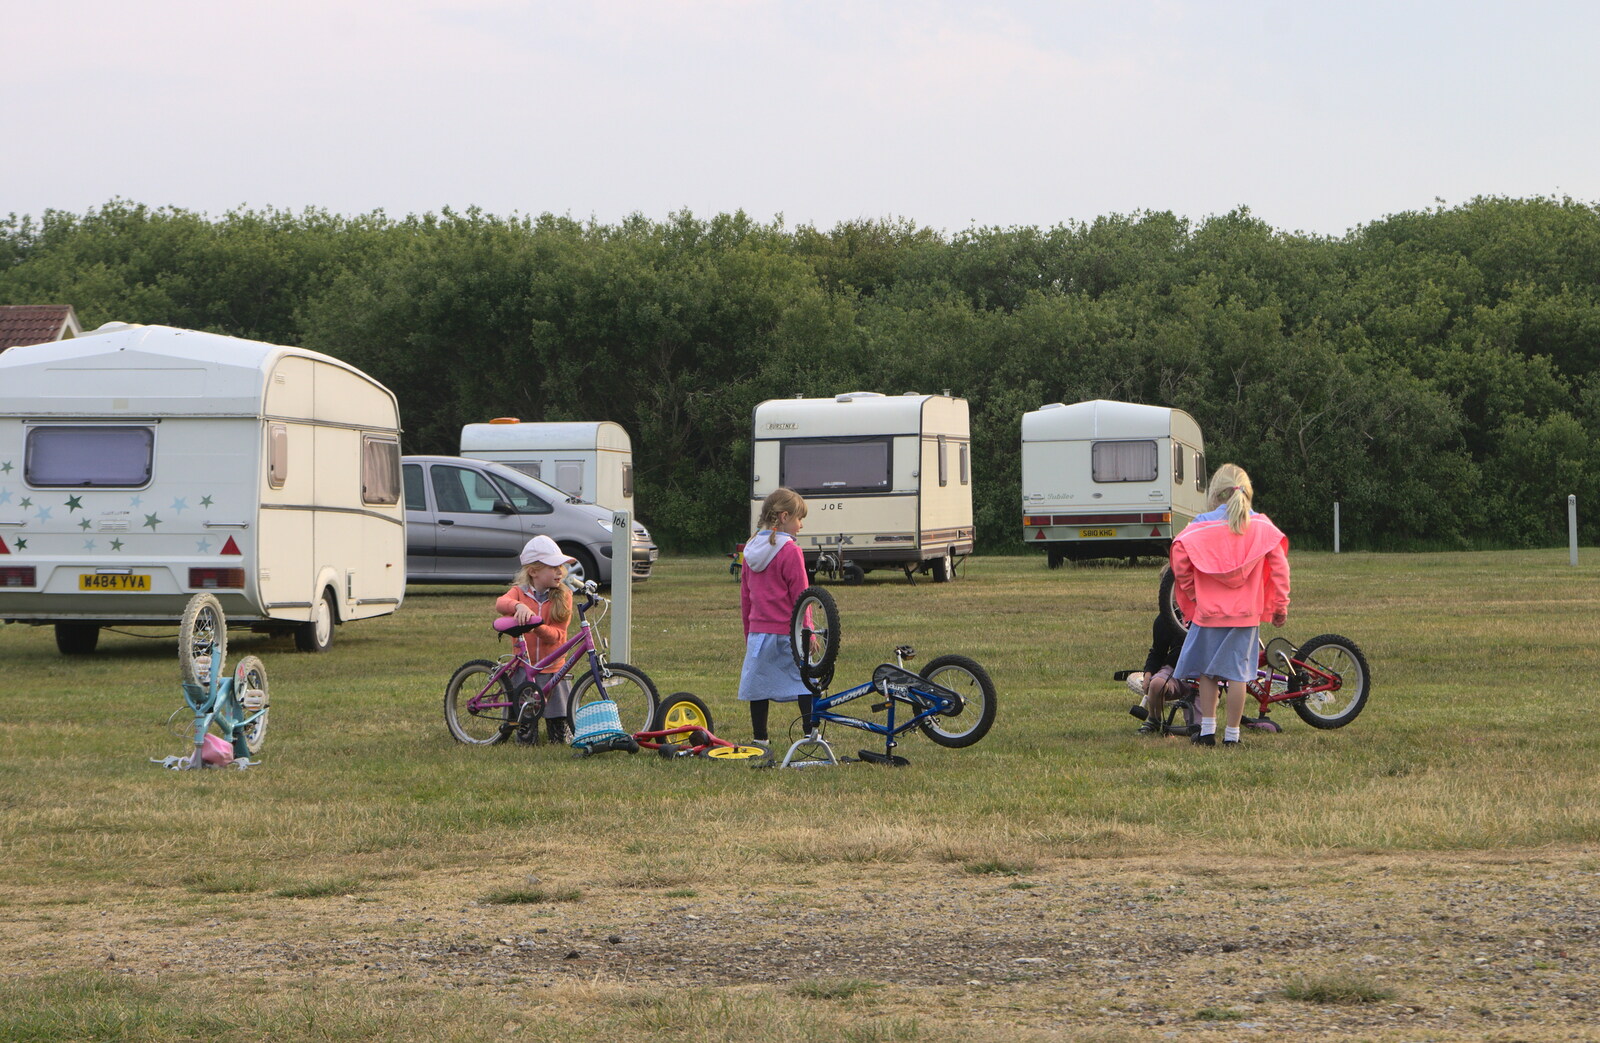 The makeshift bicycle repair shop has been set up from A Wet Weekend of Camping, Waxham Sands, Norfolk - 13th June 2015